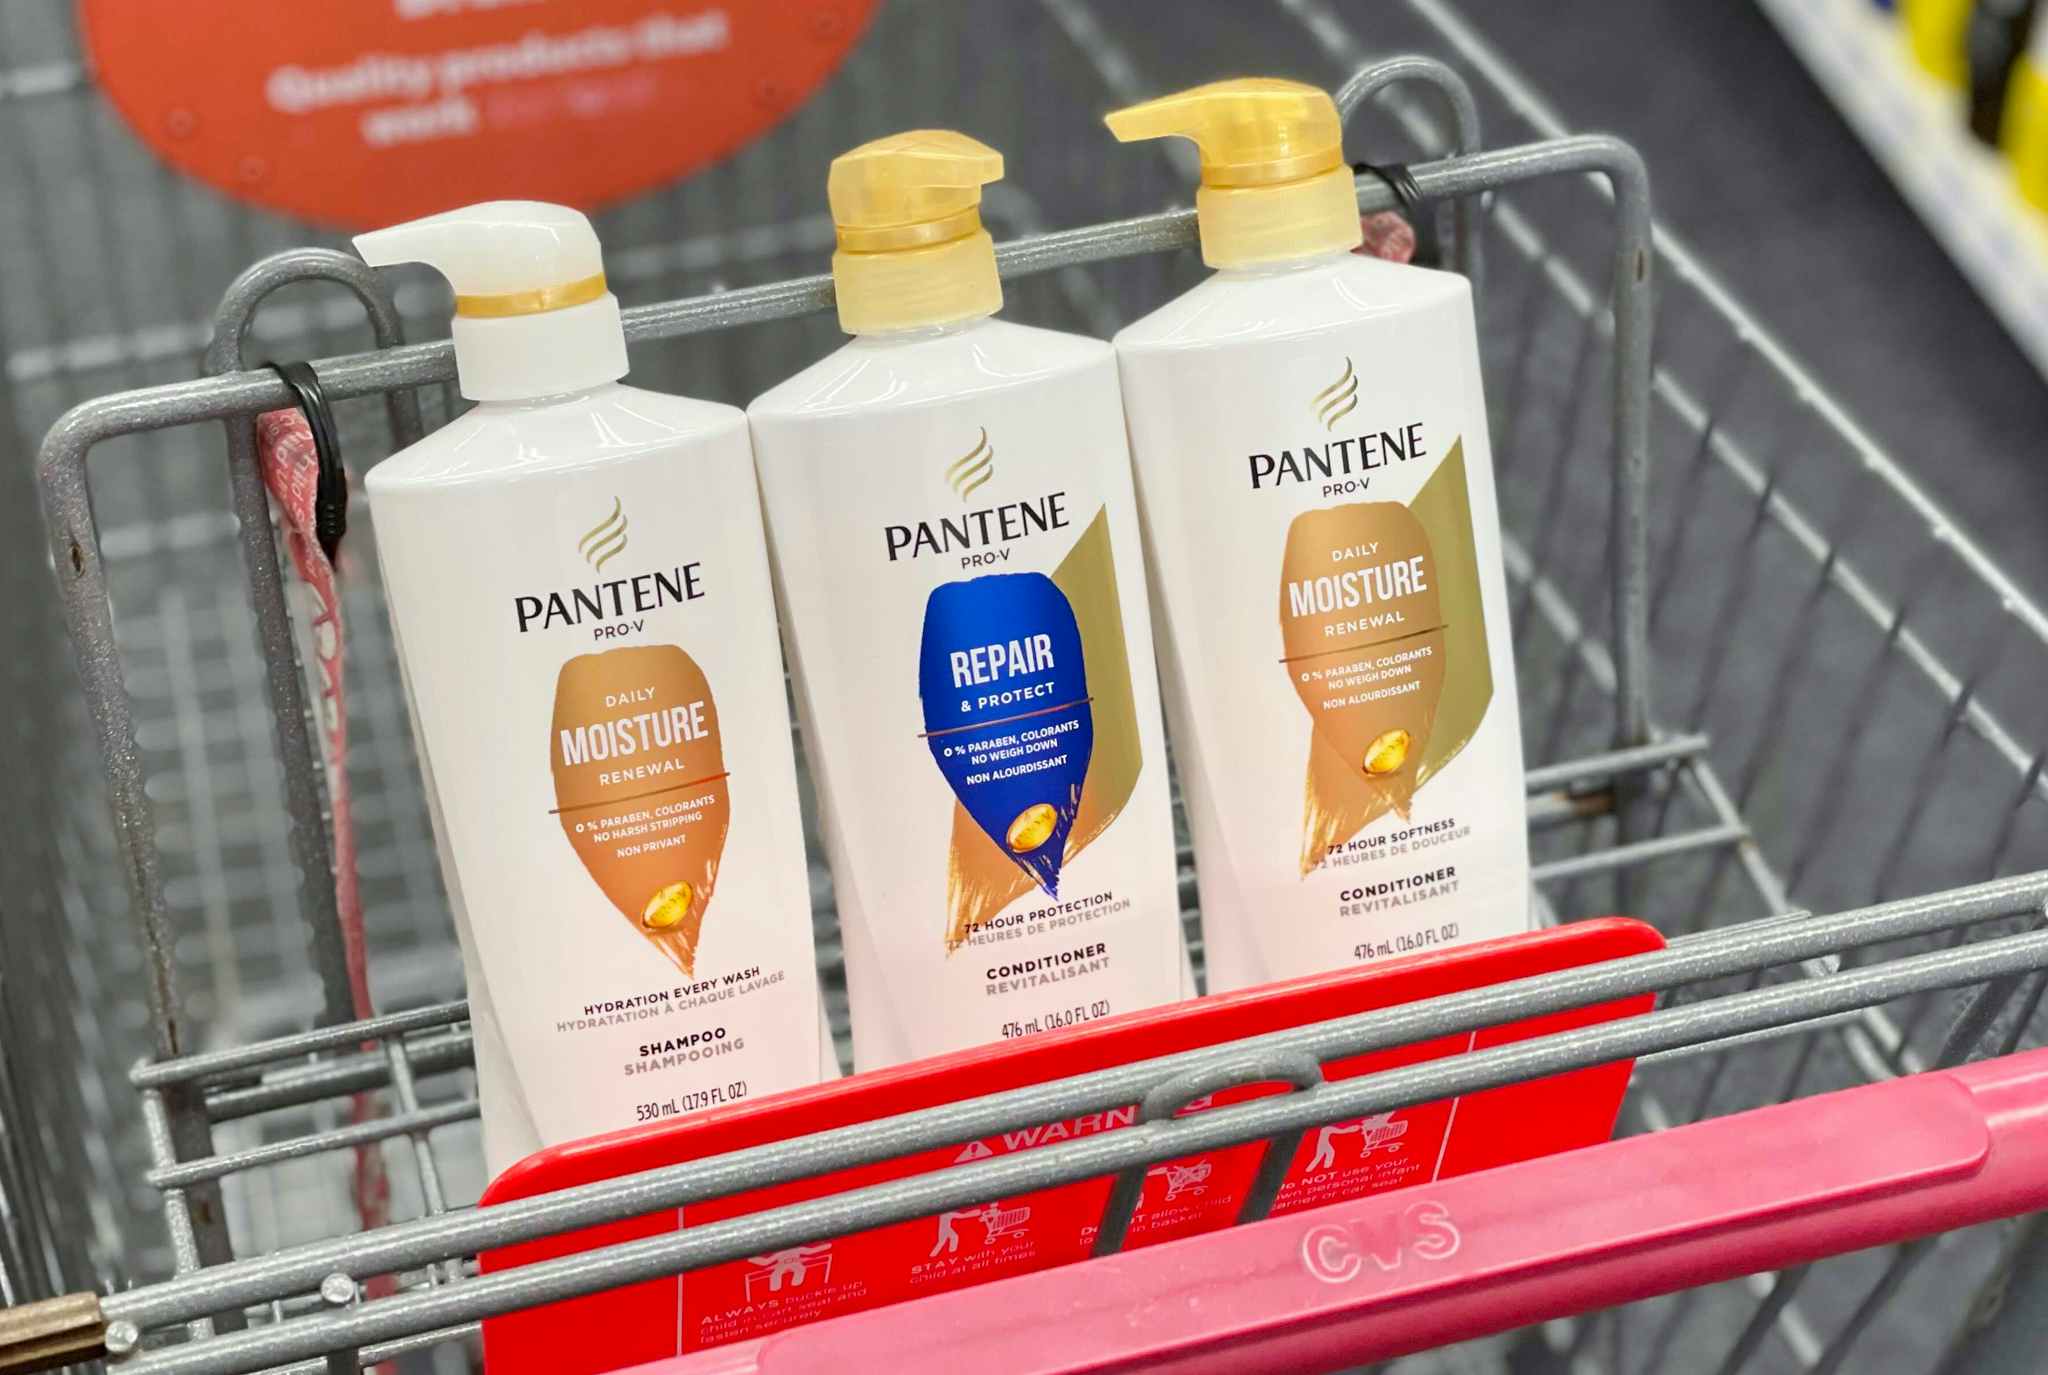 Three bottles of Pantene hair products sitting in the basket of a shopping cart at CVS.